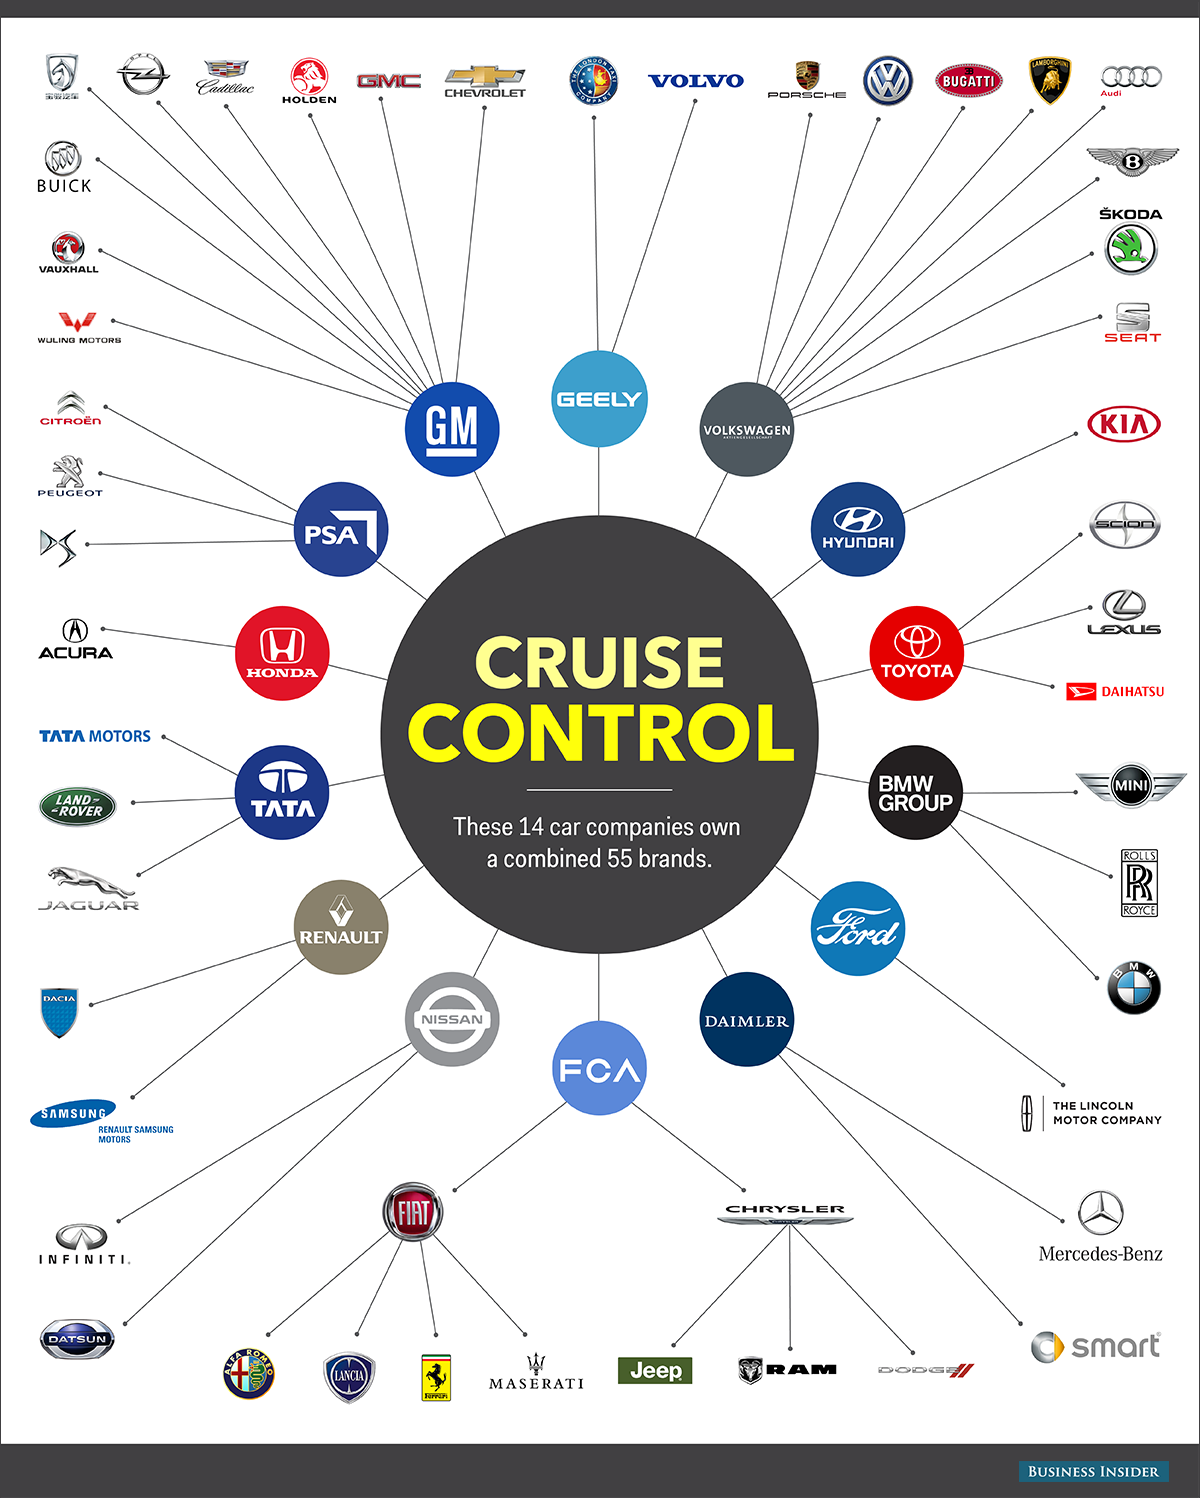 Giant Car Corporations Dominating Auto Industry – Who Owns Who